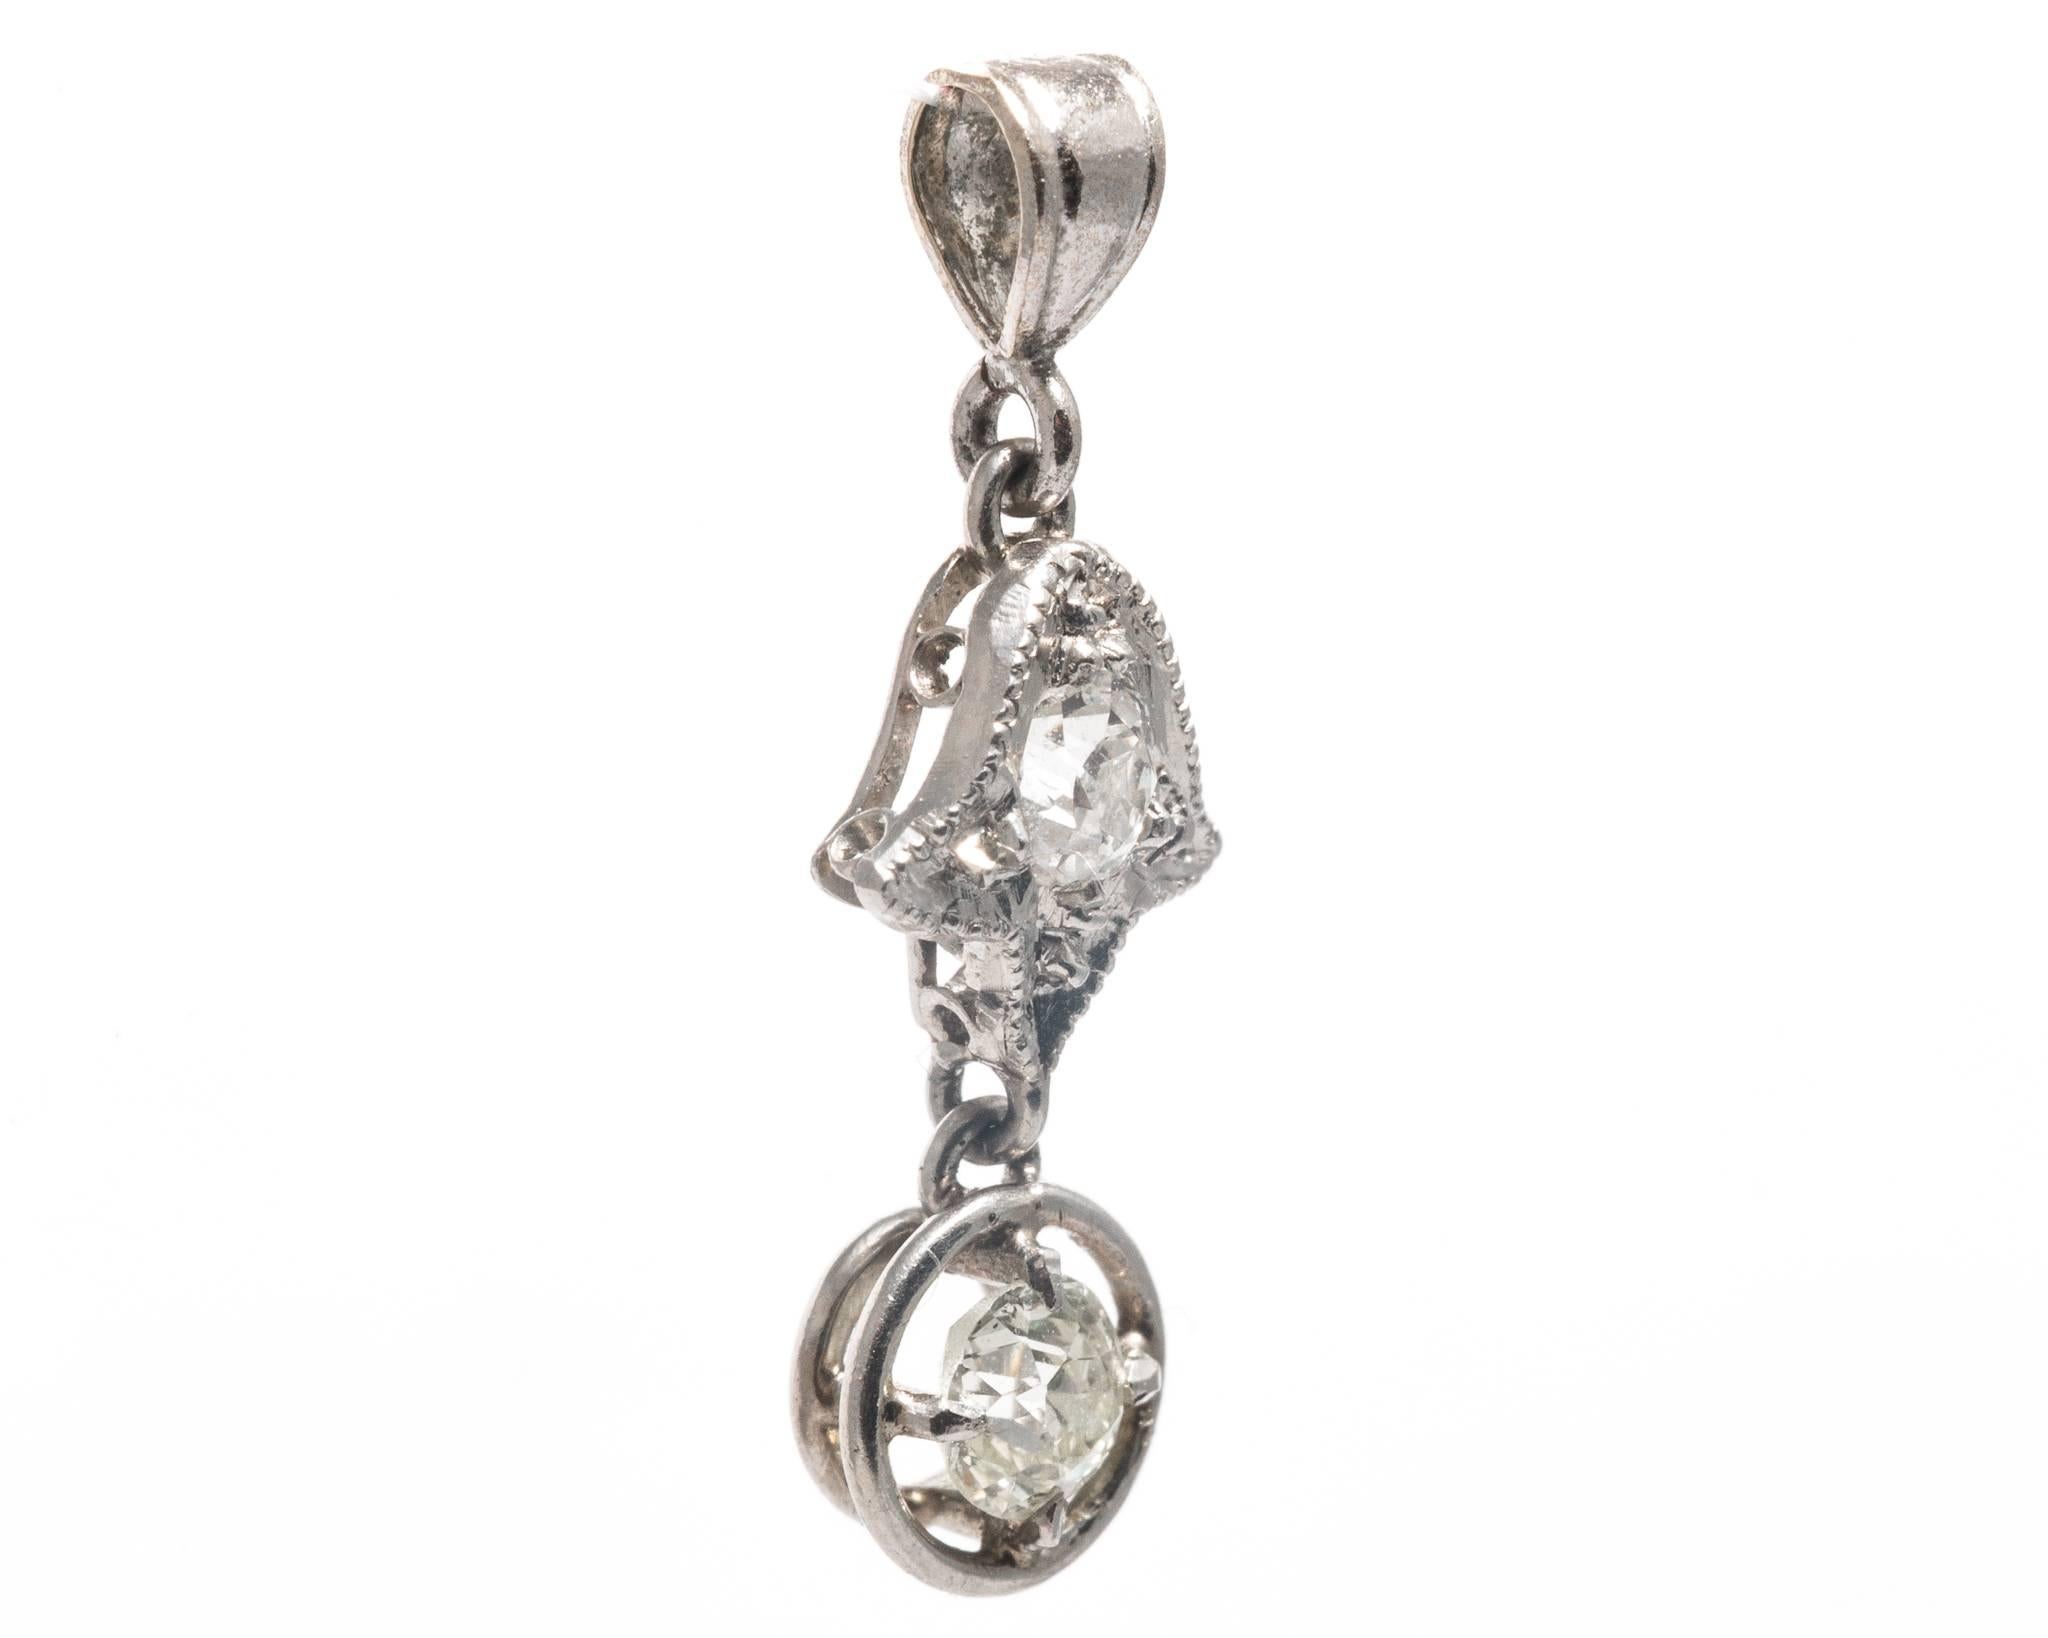 Beacon Hill Jewelers Presents:

An original art deco period diamond pendant necklace in luxurious platinum. Set with a pair of sparkling antique European cut diamonds this pendant is designed as a tulip like flower attached to a dangling